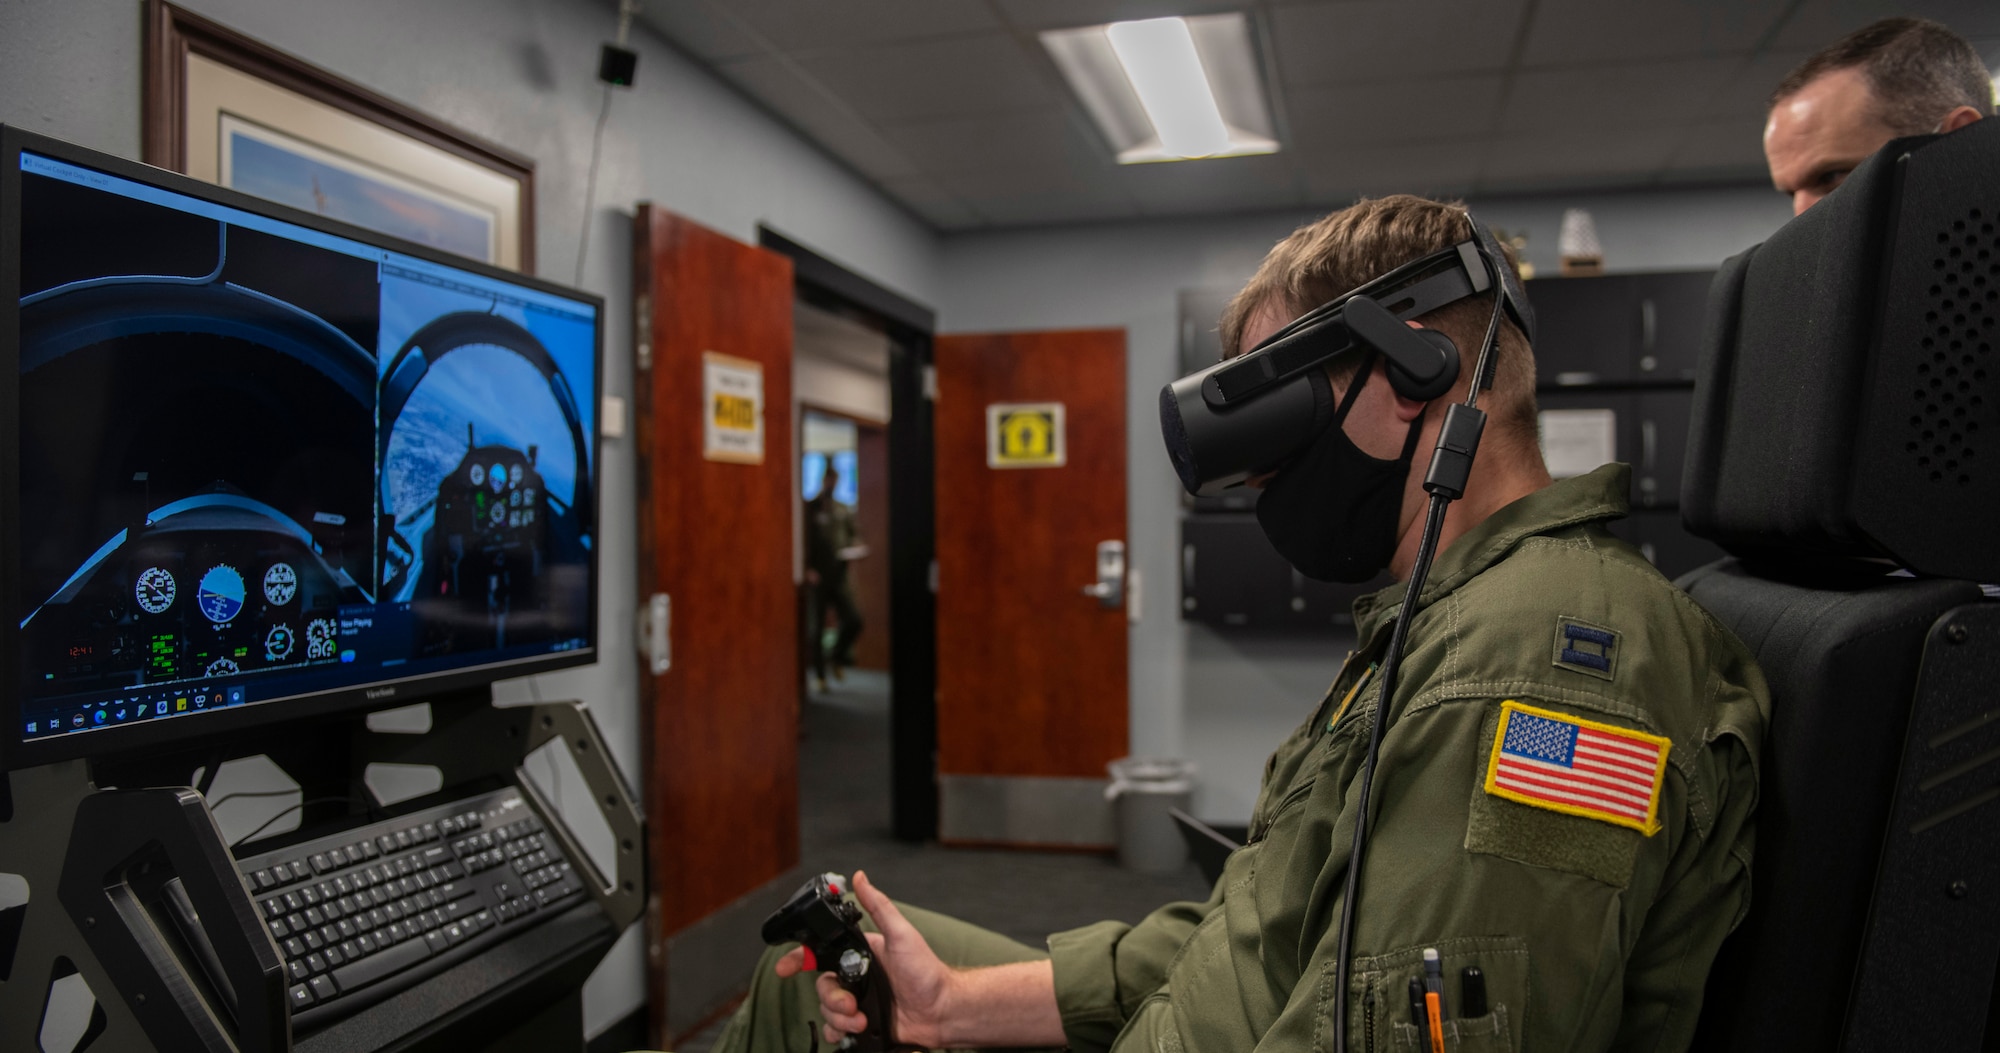 U. S. Air Force Capt. Kyle Maloney, a pilot temporarily assigned to the 559th Flying Training Squadron, test flies a T-6 Texan II simulator during an immersive training device evaluation at Joint Base San Antonio-Randolph, Feb. 1, 2021.